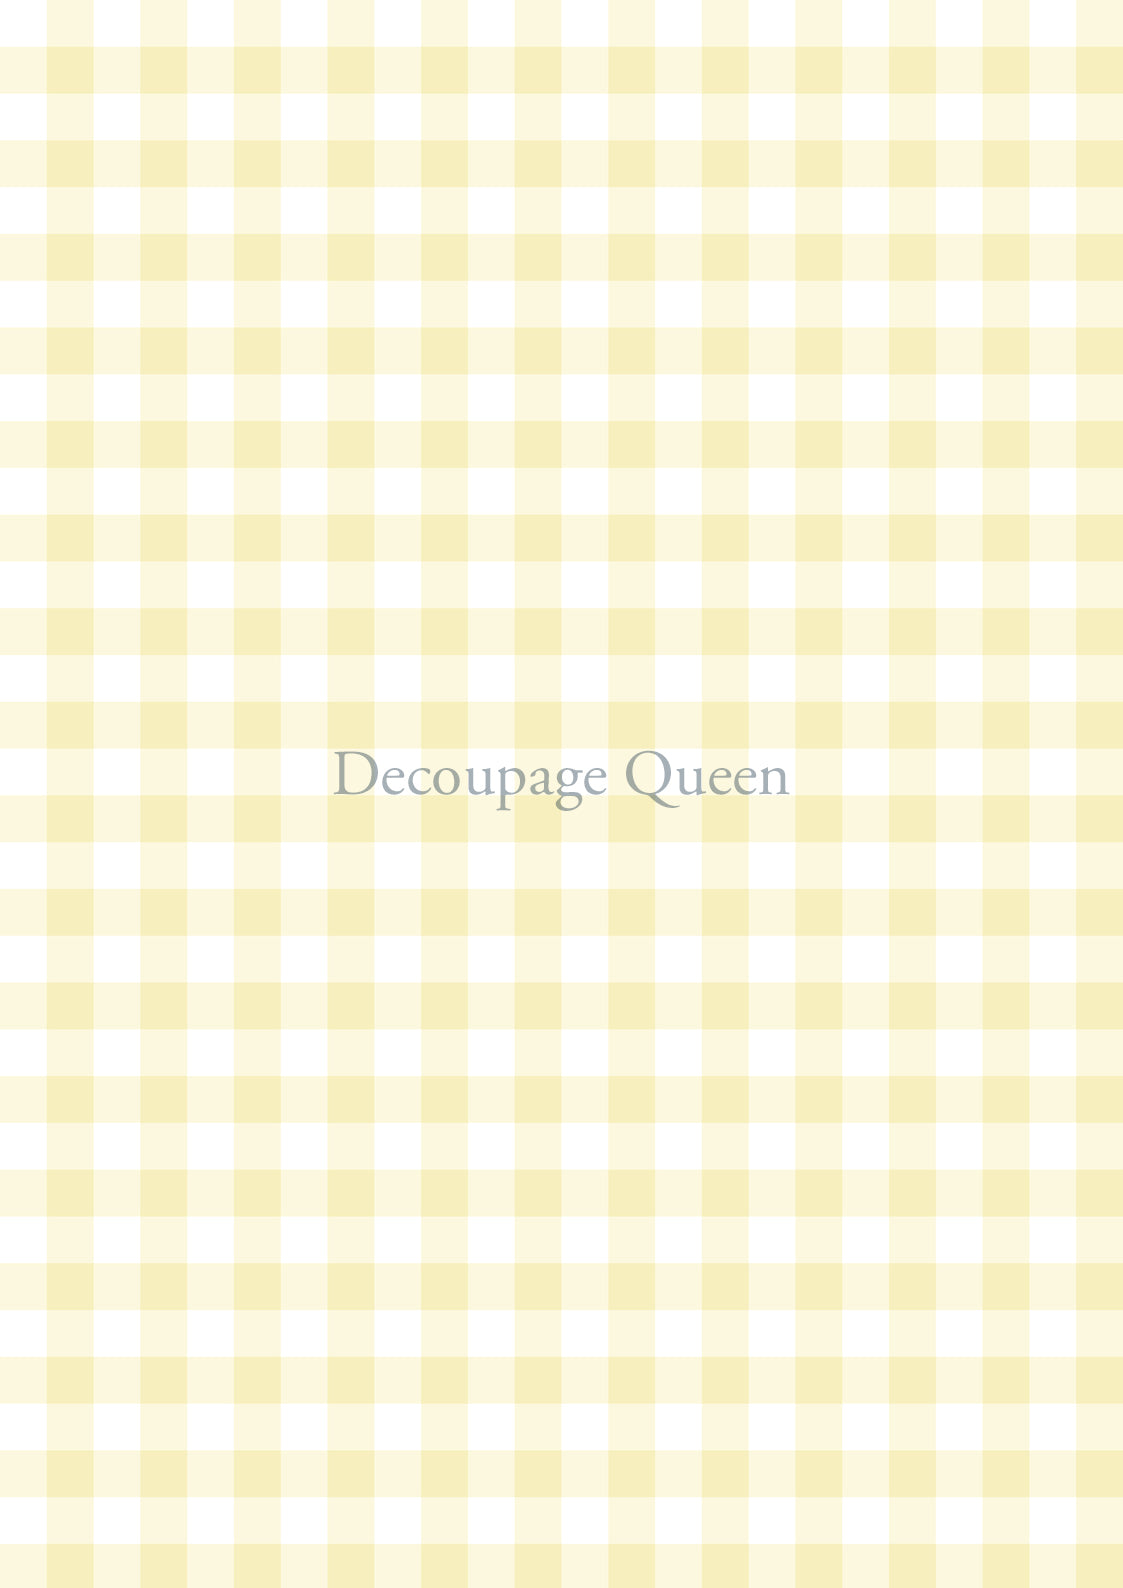 Yellow Gingham A4 Rice Paper Decoupage Queen